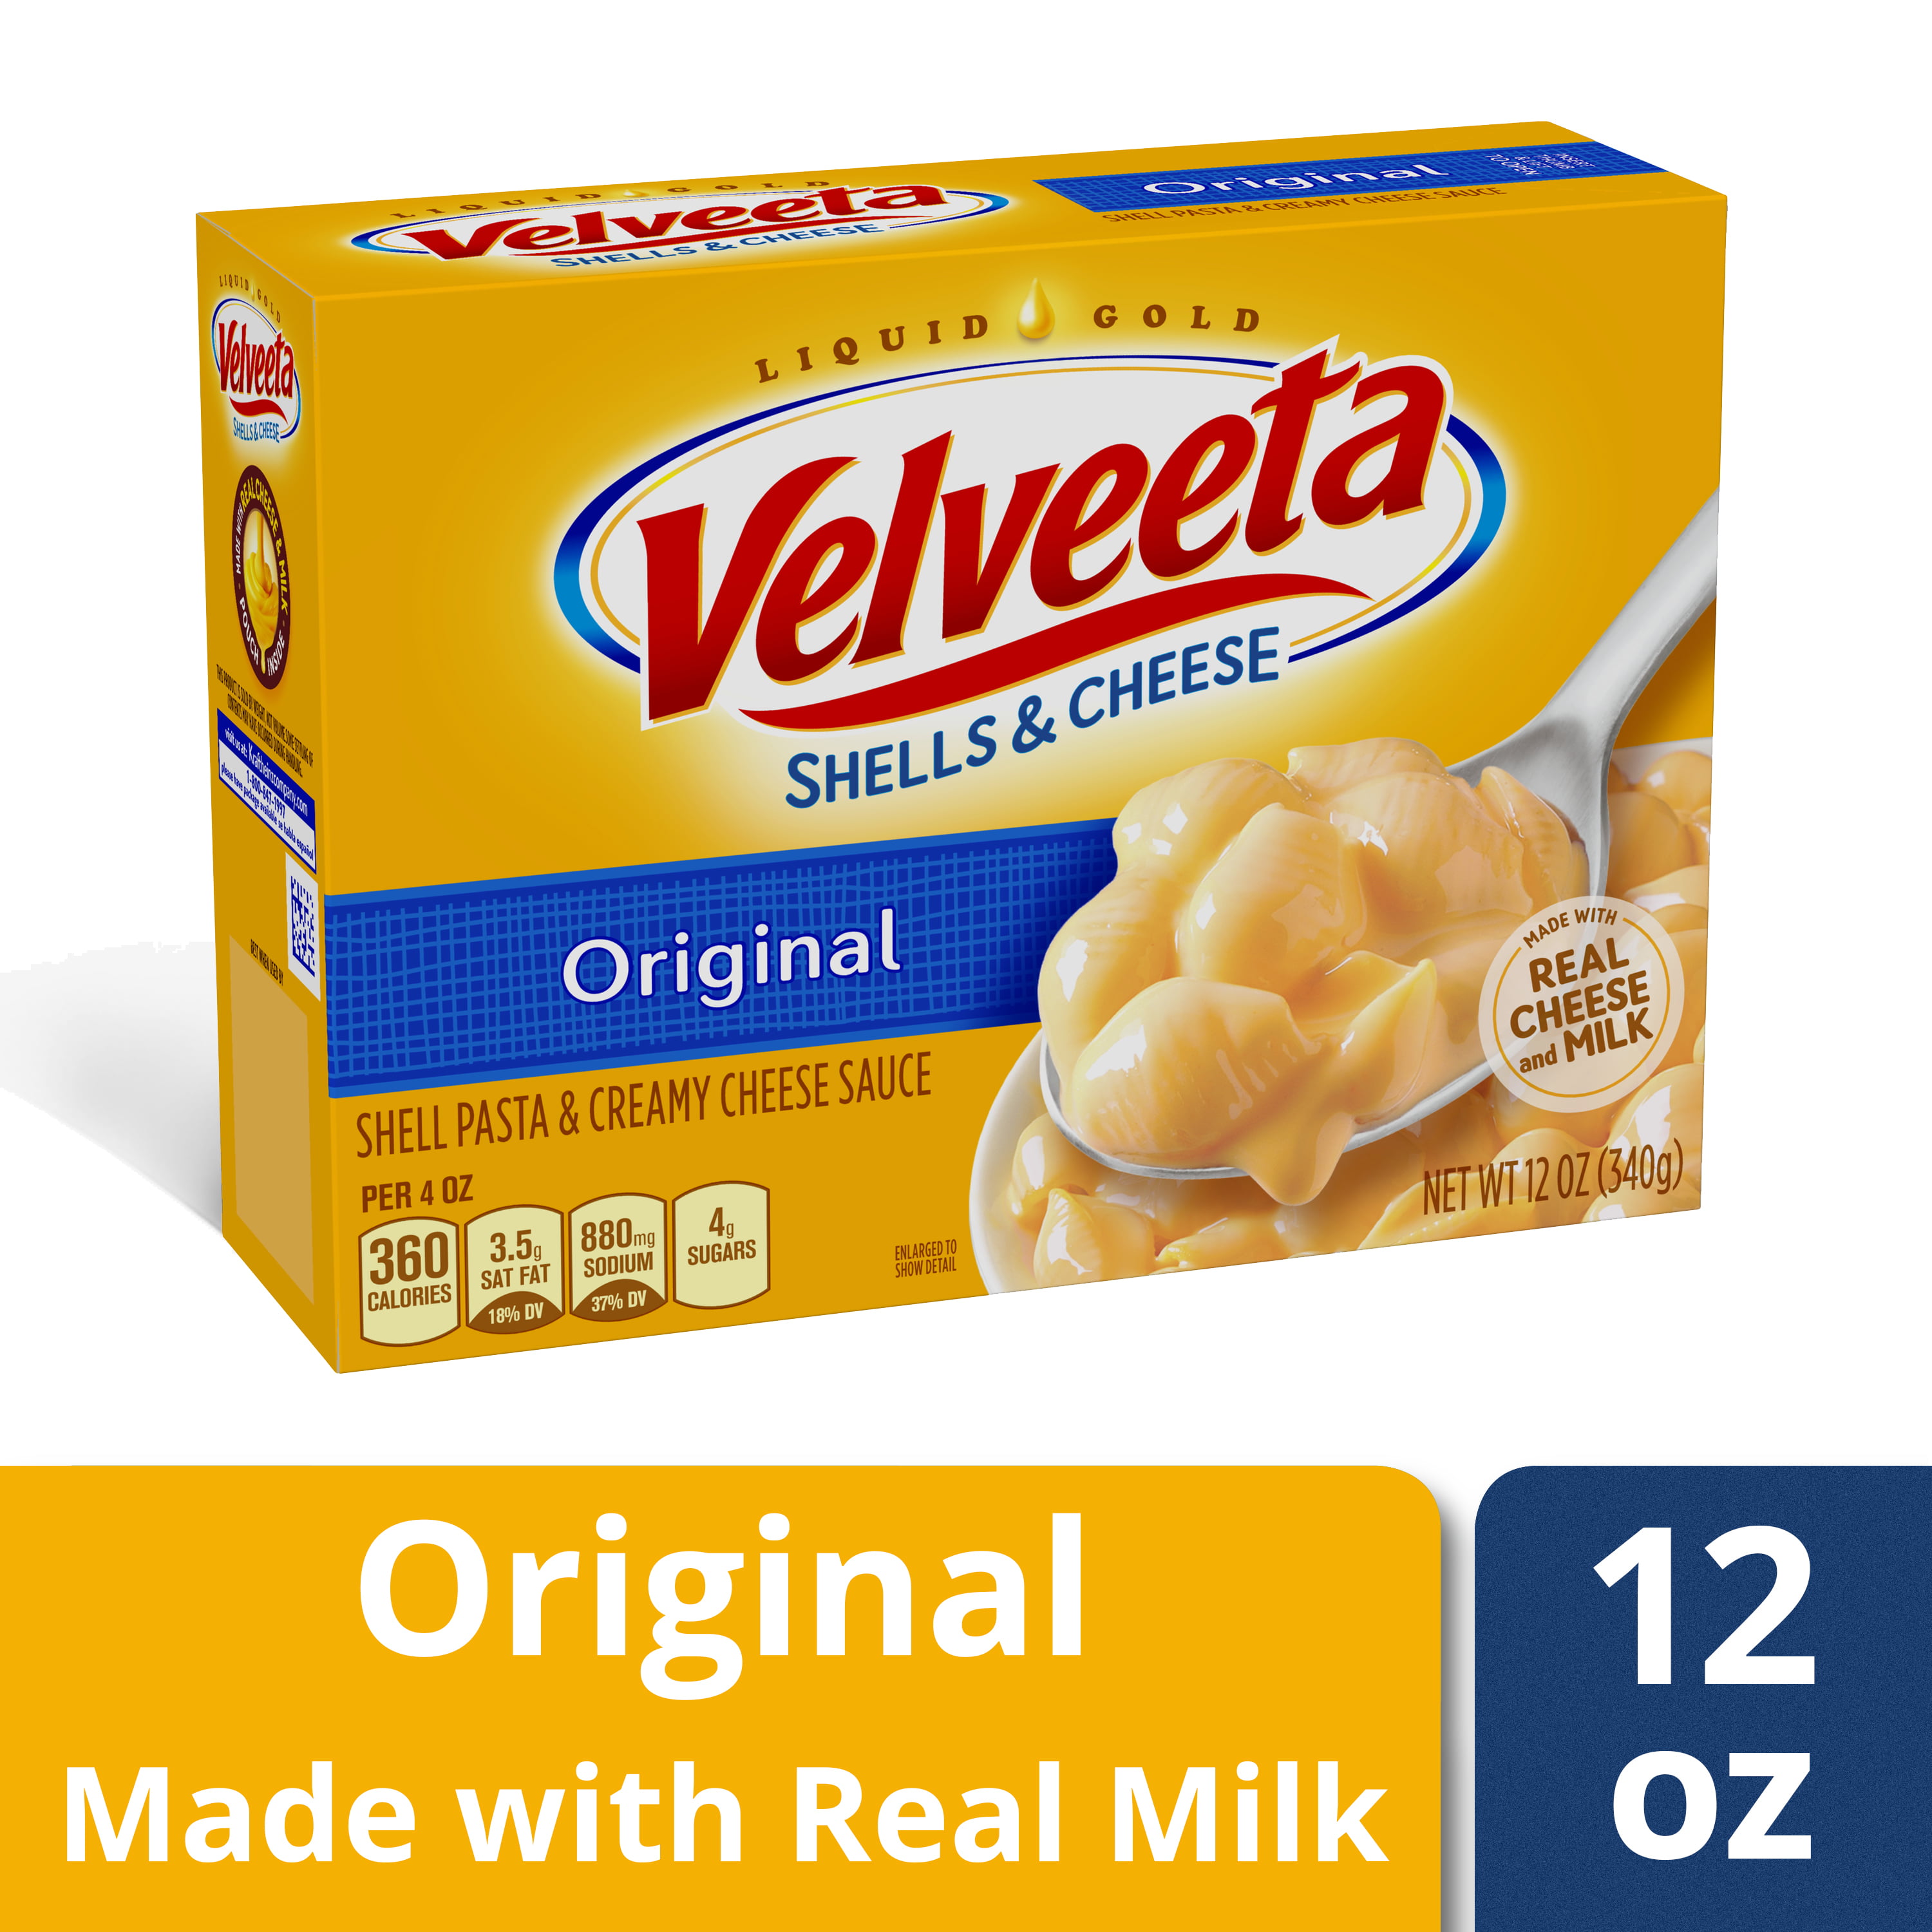 There are 180 calories in a 14 cup serving of kraft velveeta cheese sauce. 